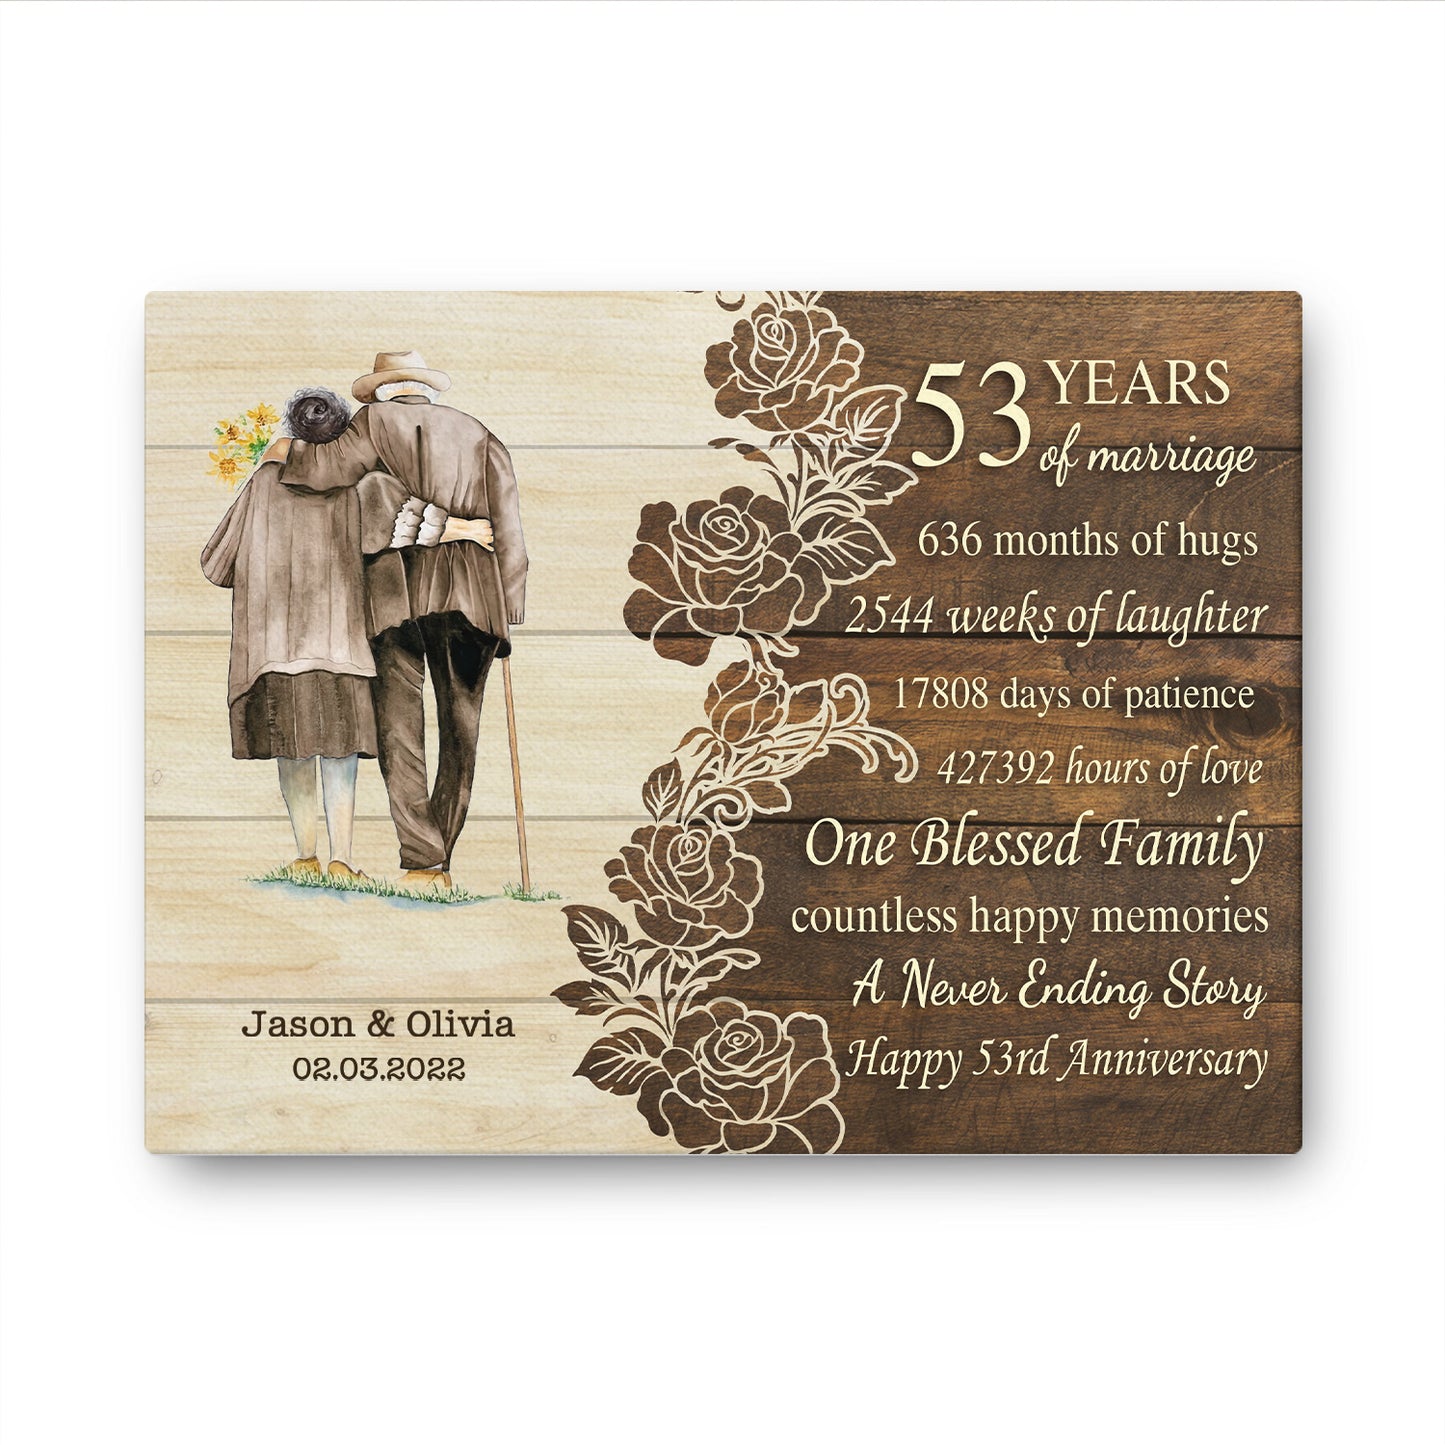 Happy 53rd Anniversary 53 Years Of Marriage Personalizedwitch Canvas